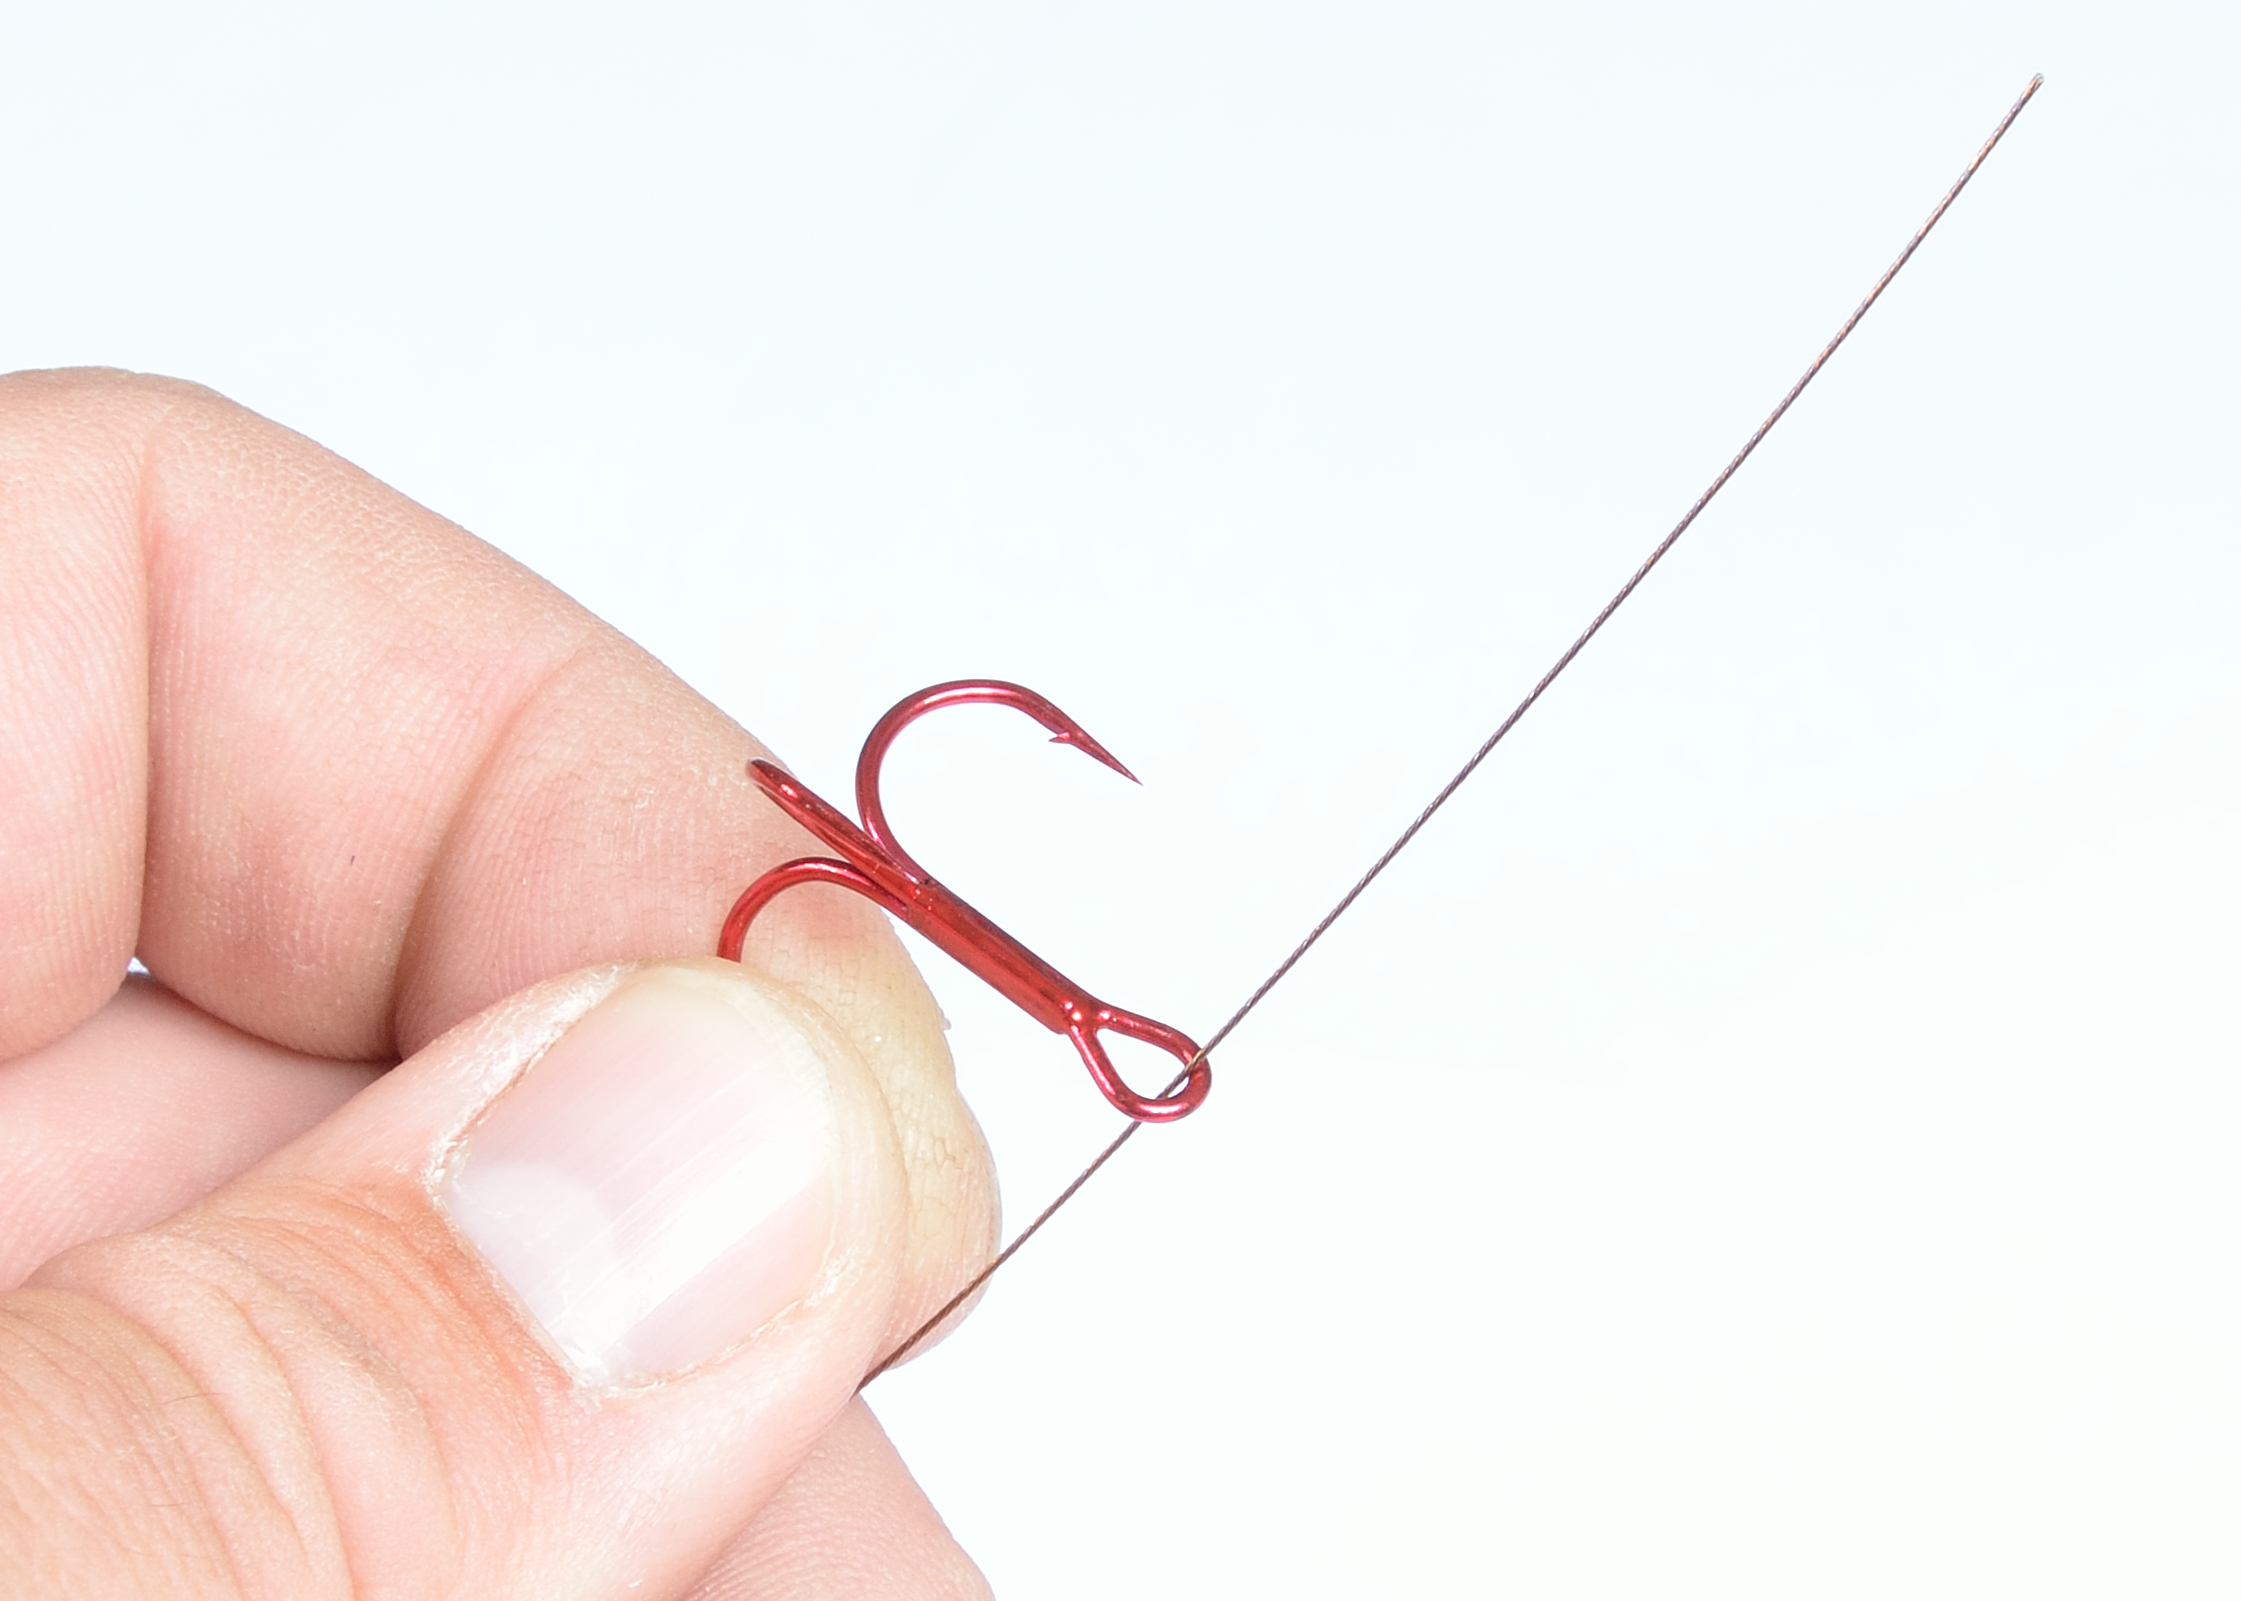 Knotless Knot: 4 Simple Steps to Tying the Knotless Knot